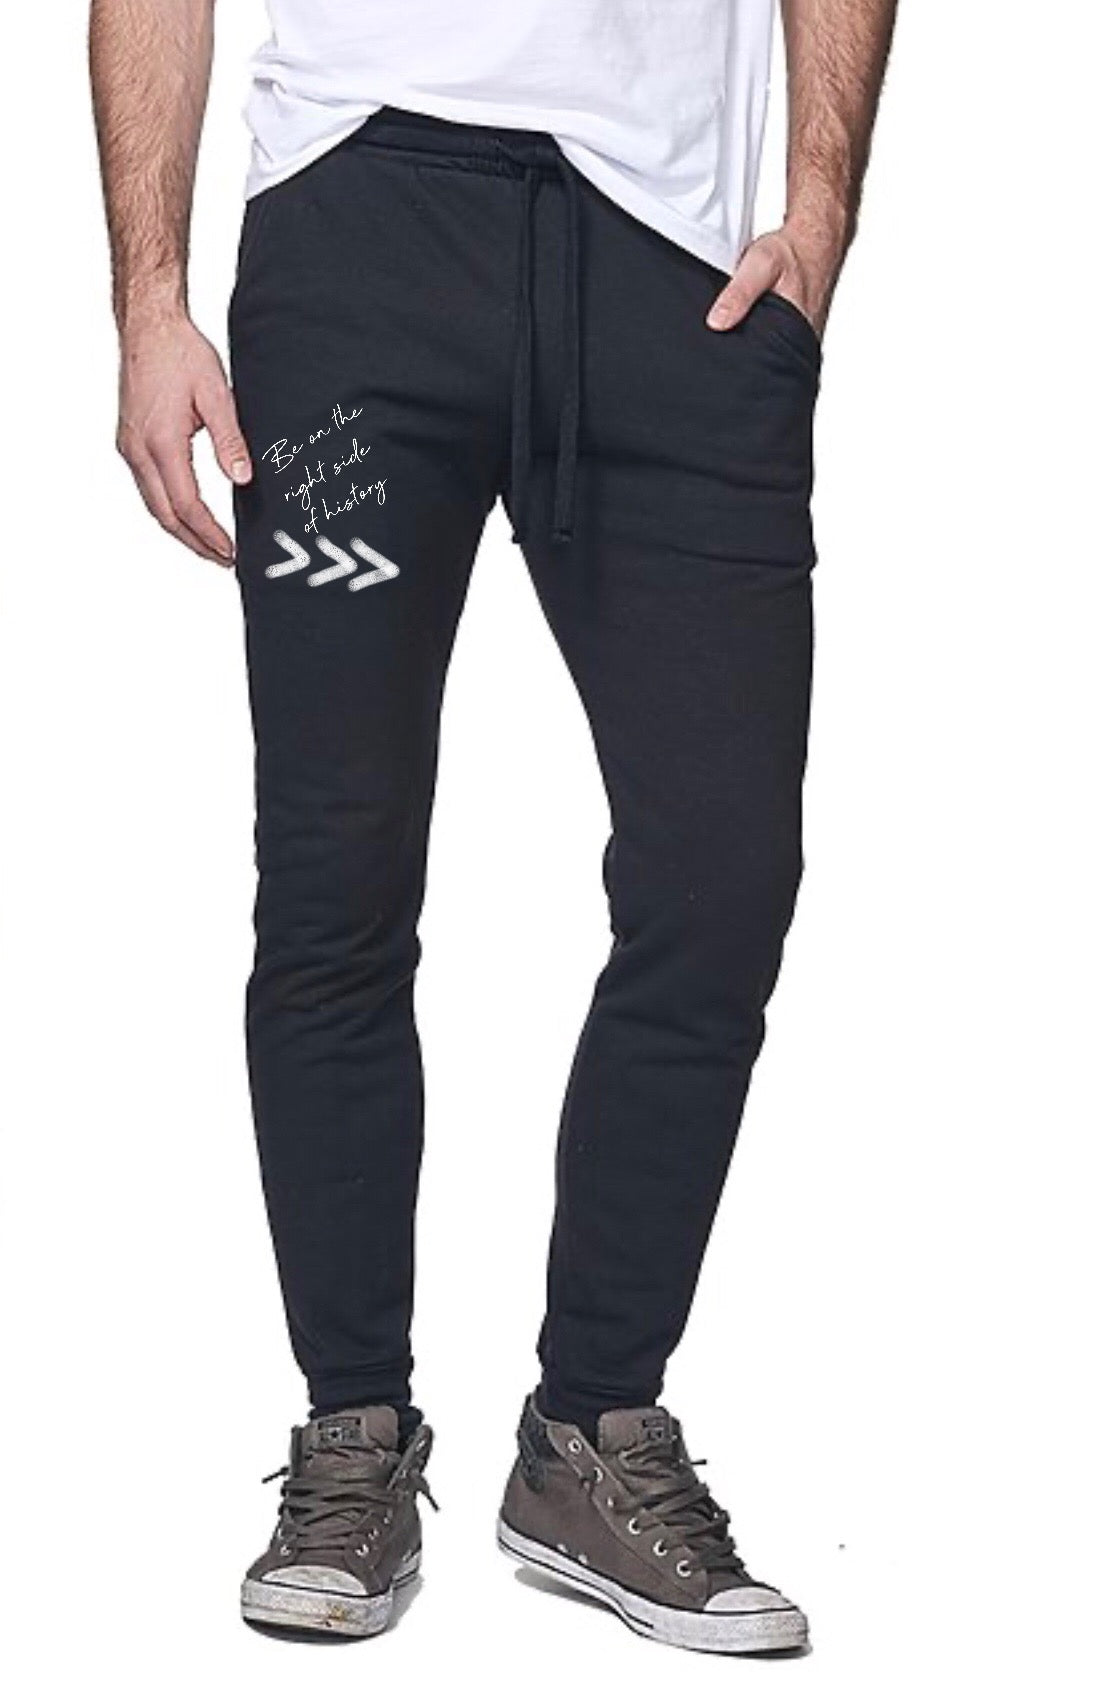 (S/S 2020) French Terry Unisex Joggers in BLACK ORGANIC RPET